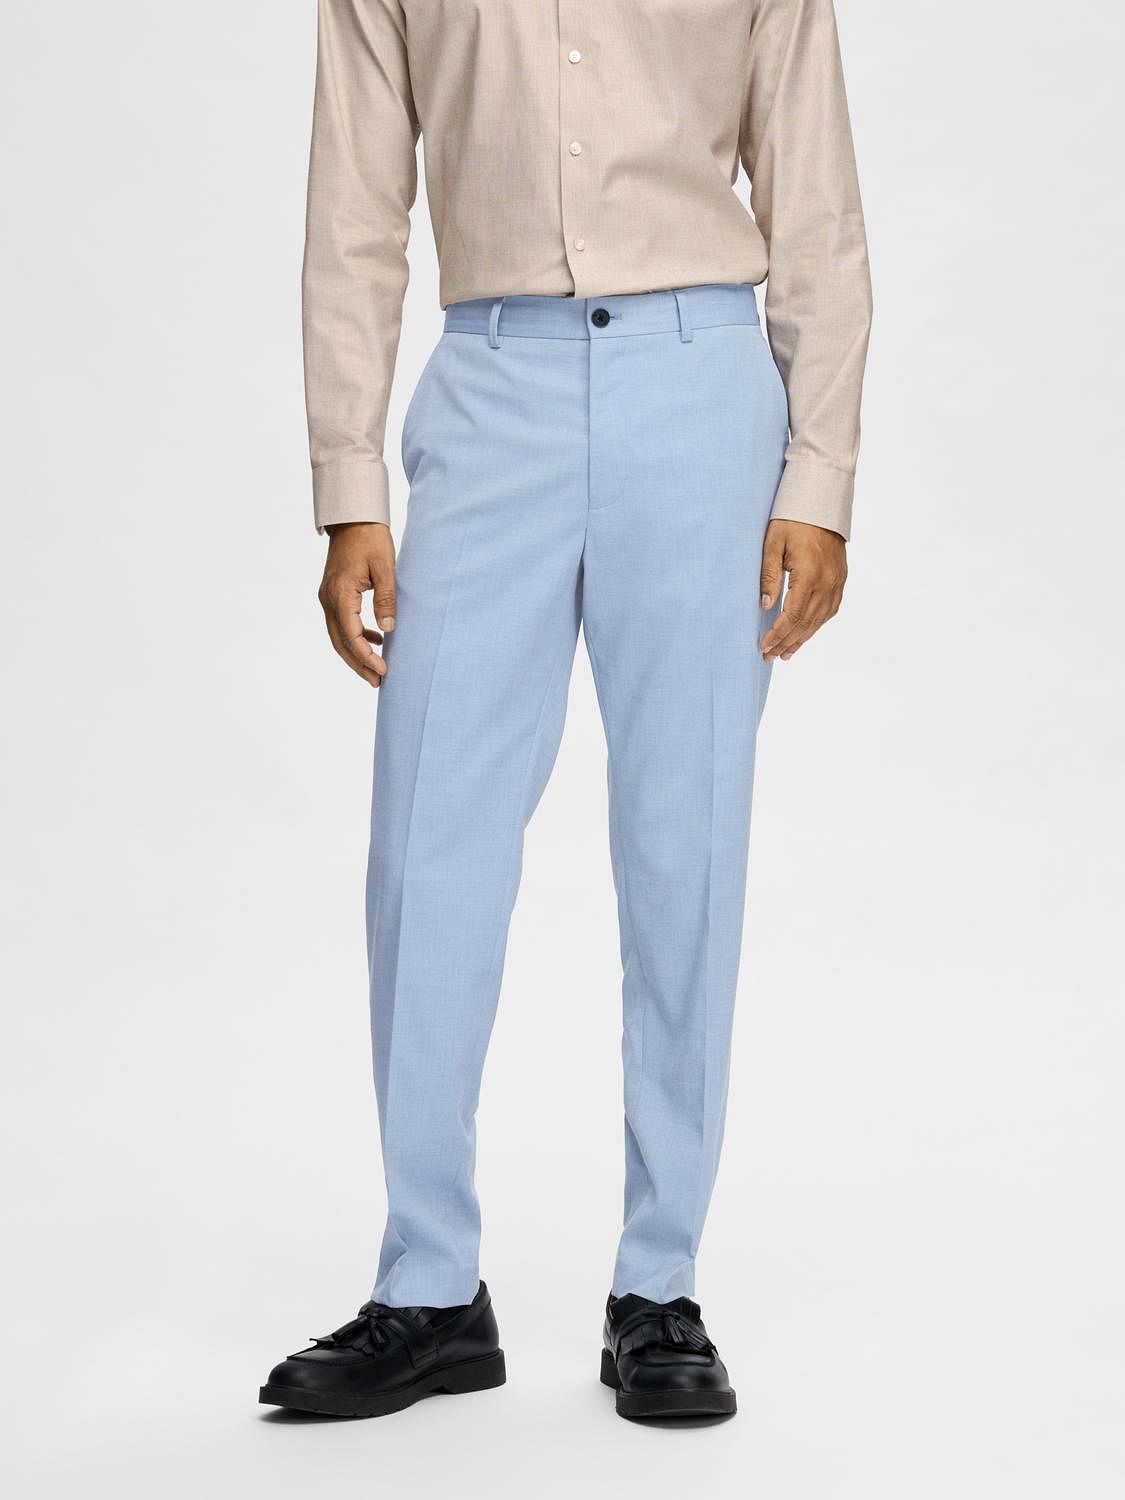 Mens Formal Pant Special Quality By Joise Adorn-sky Blue – Joise Adorn